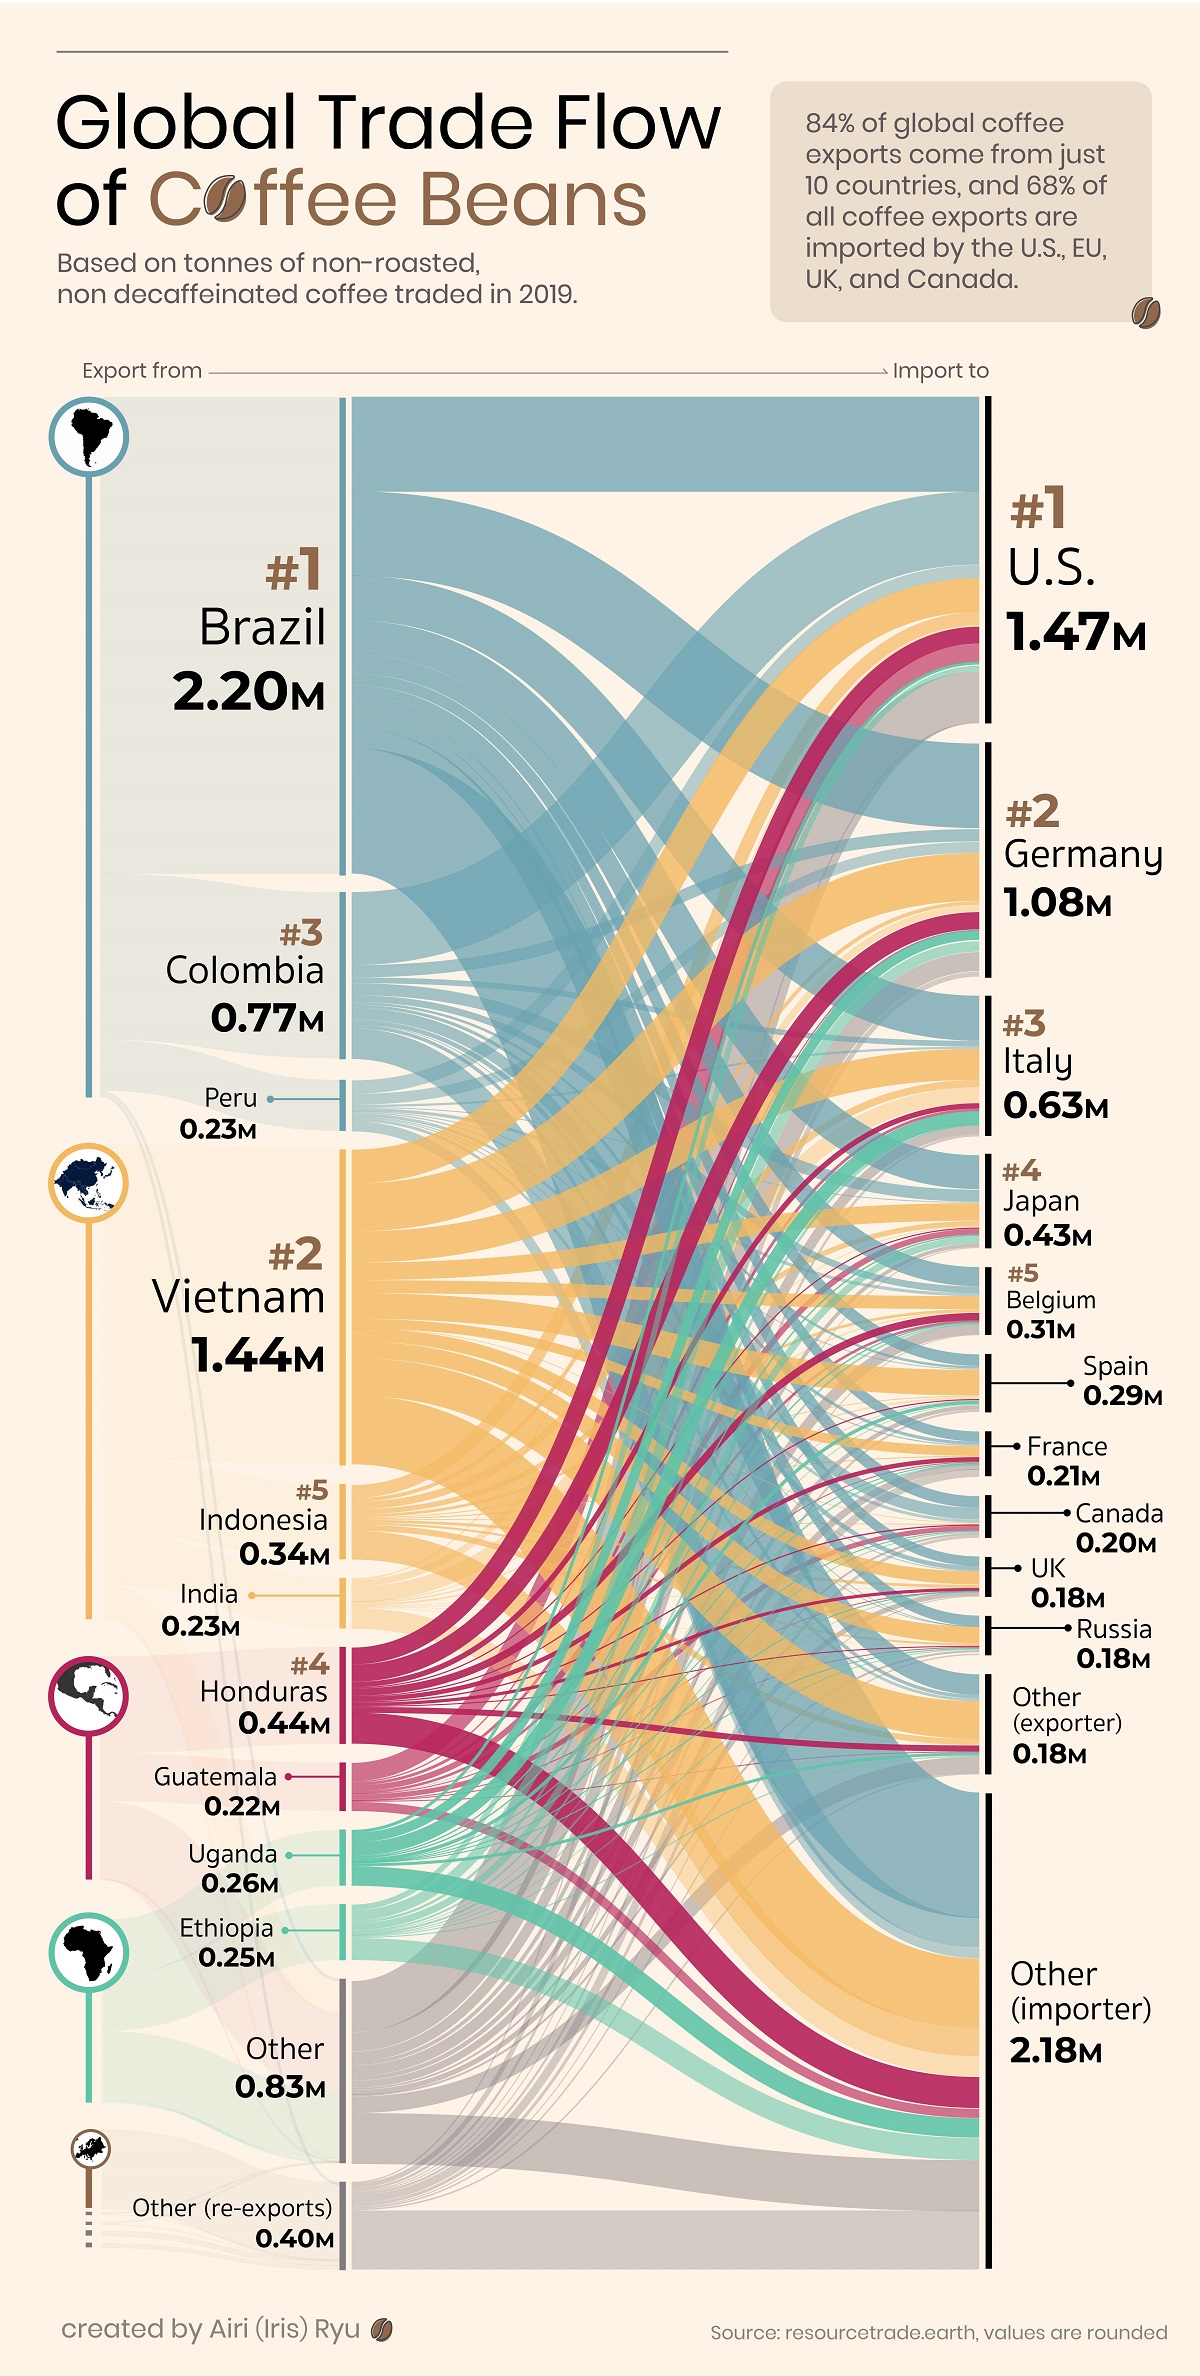 charting the global coffee trade by export flows in 2019.